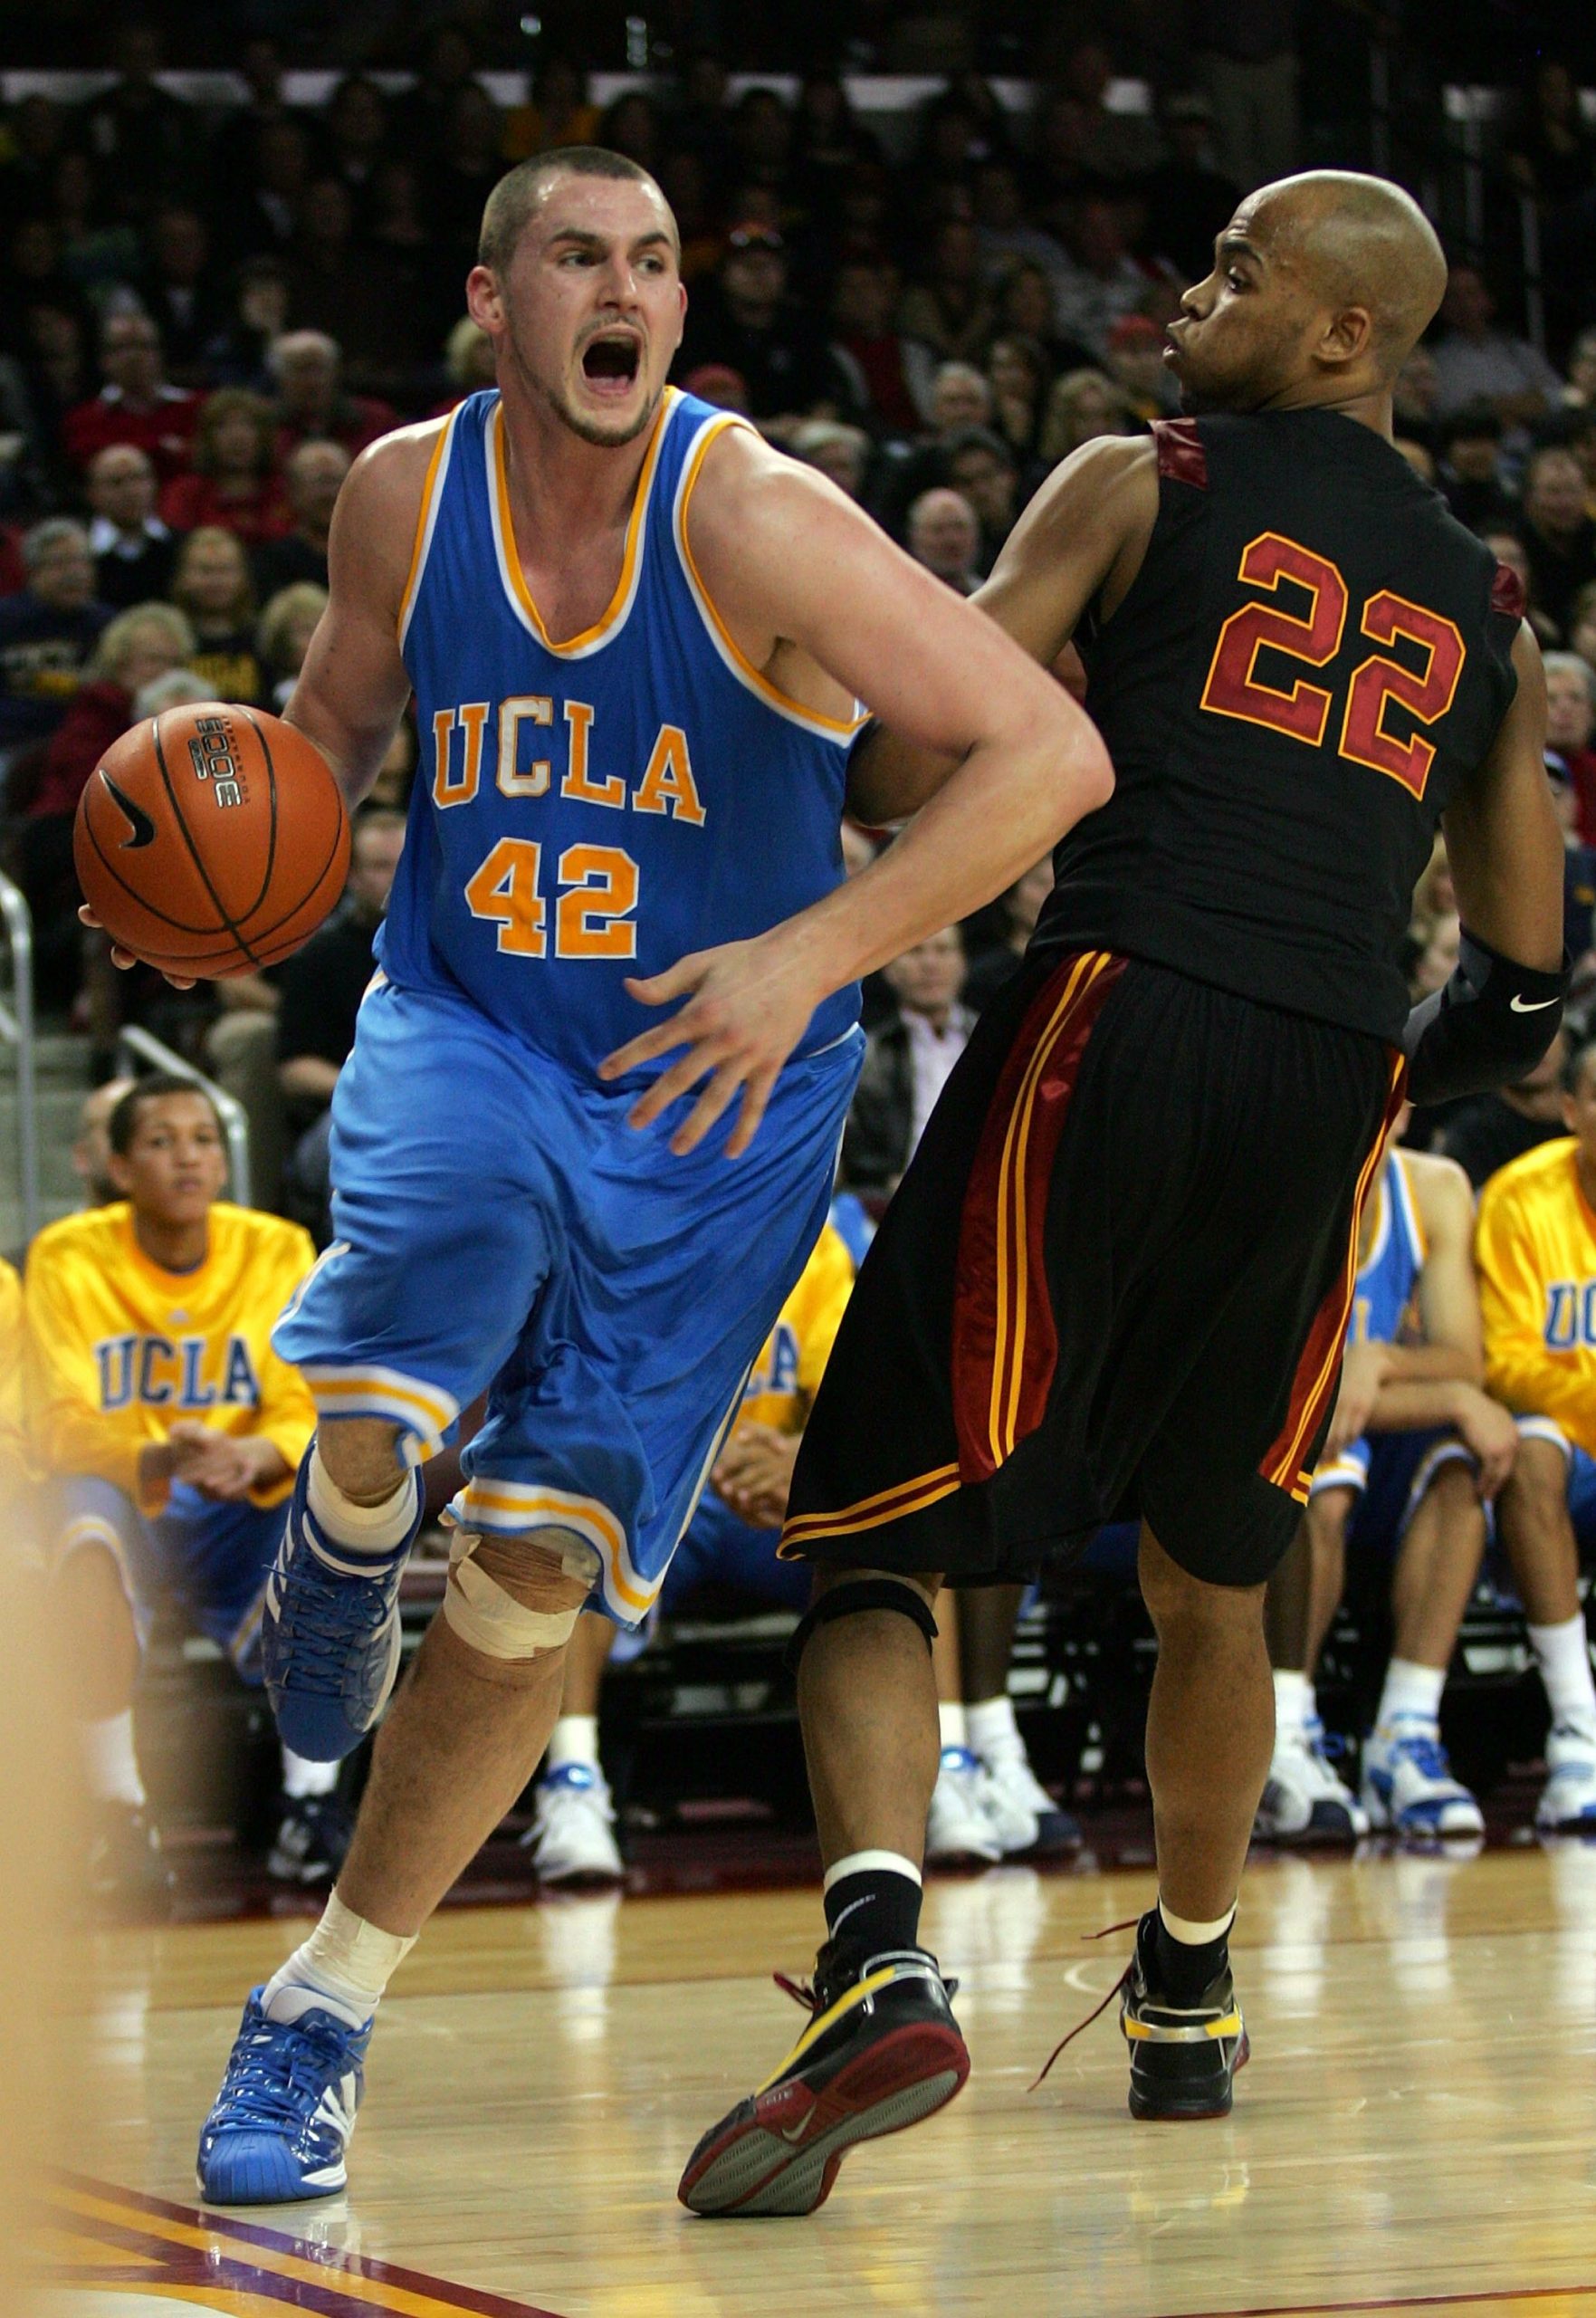 Kevin Love photo